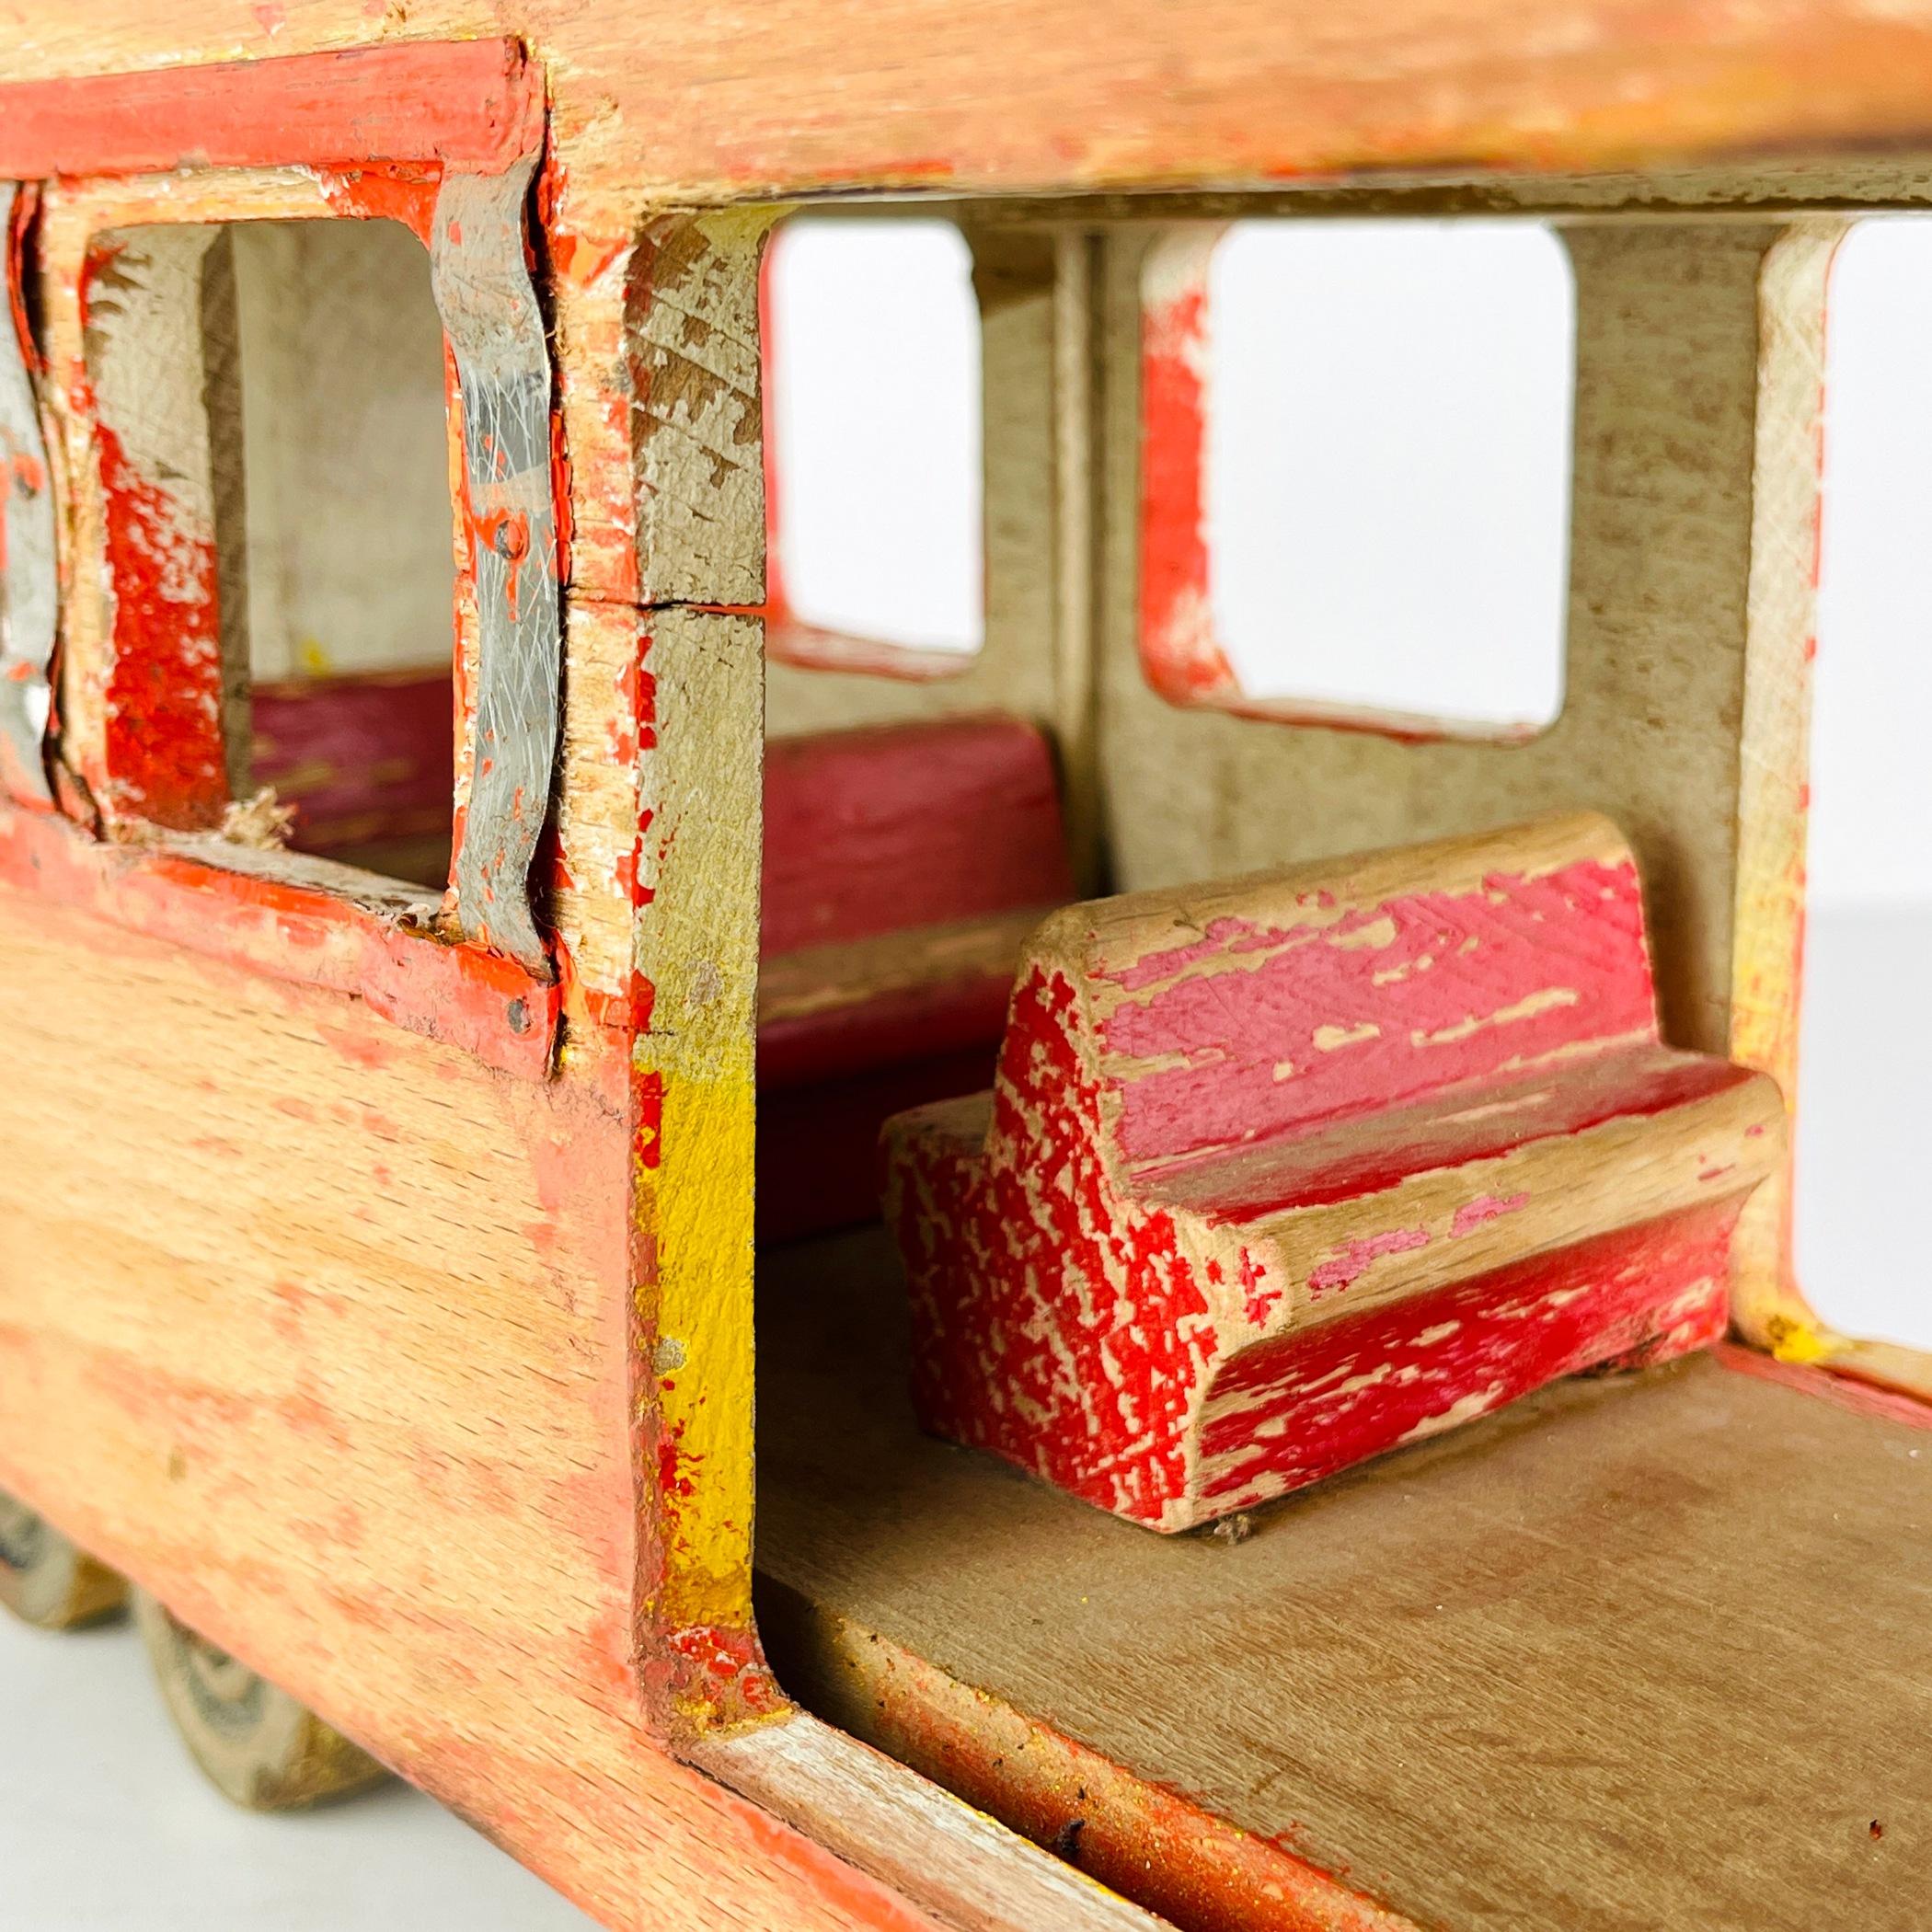 Wood Vintage wood toy Railway Carriage Italy 1950s 